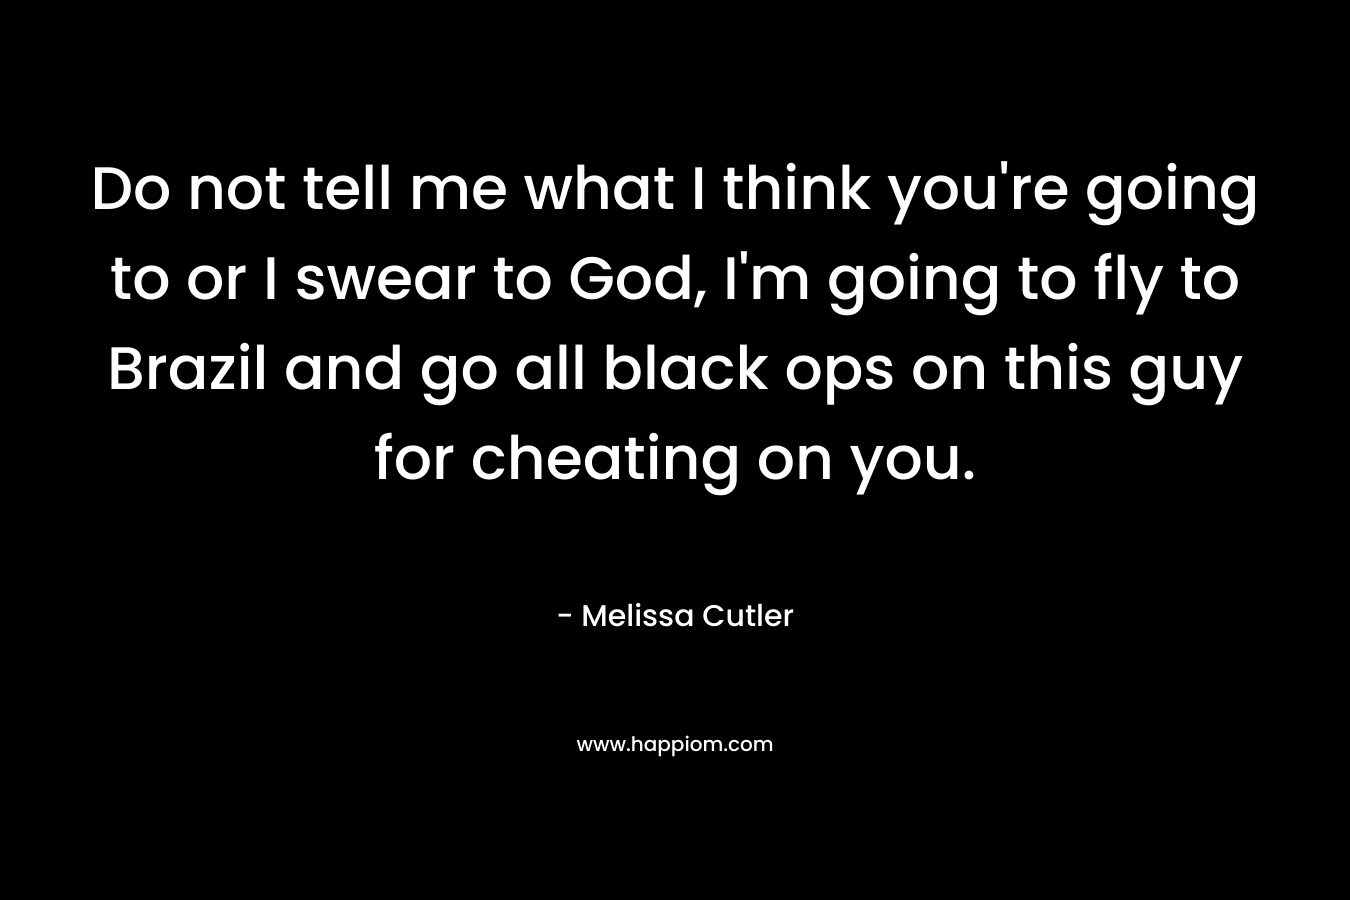 Do not tell me what I think you’re going to or I swear to God, I’m going to fly to Brazil and go all black ops on this guy for cheating on you. – Melissa Cutler